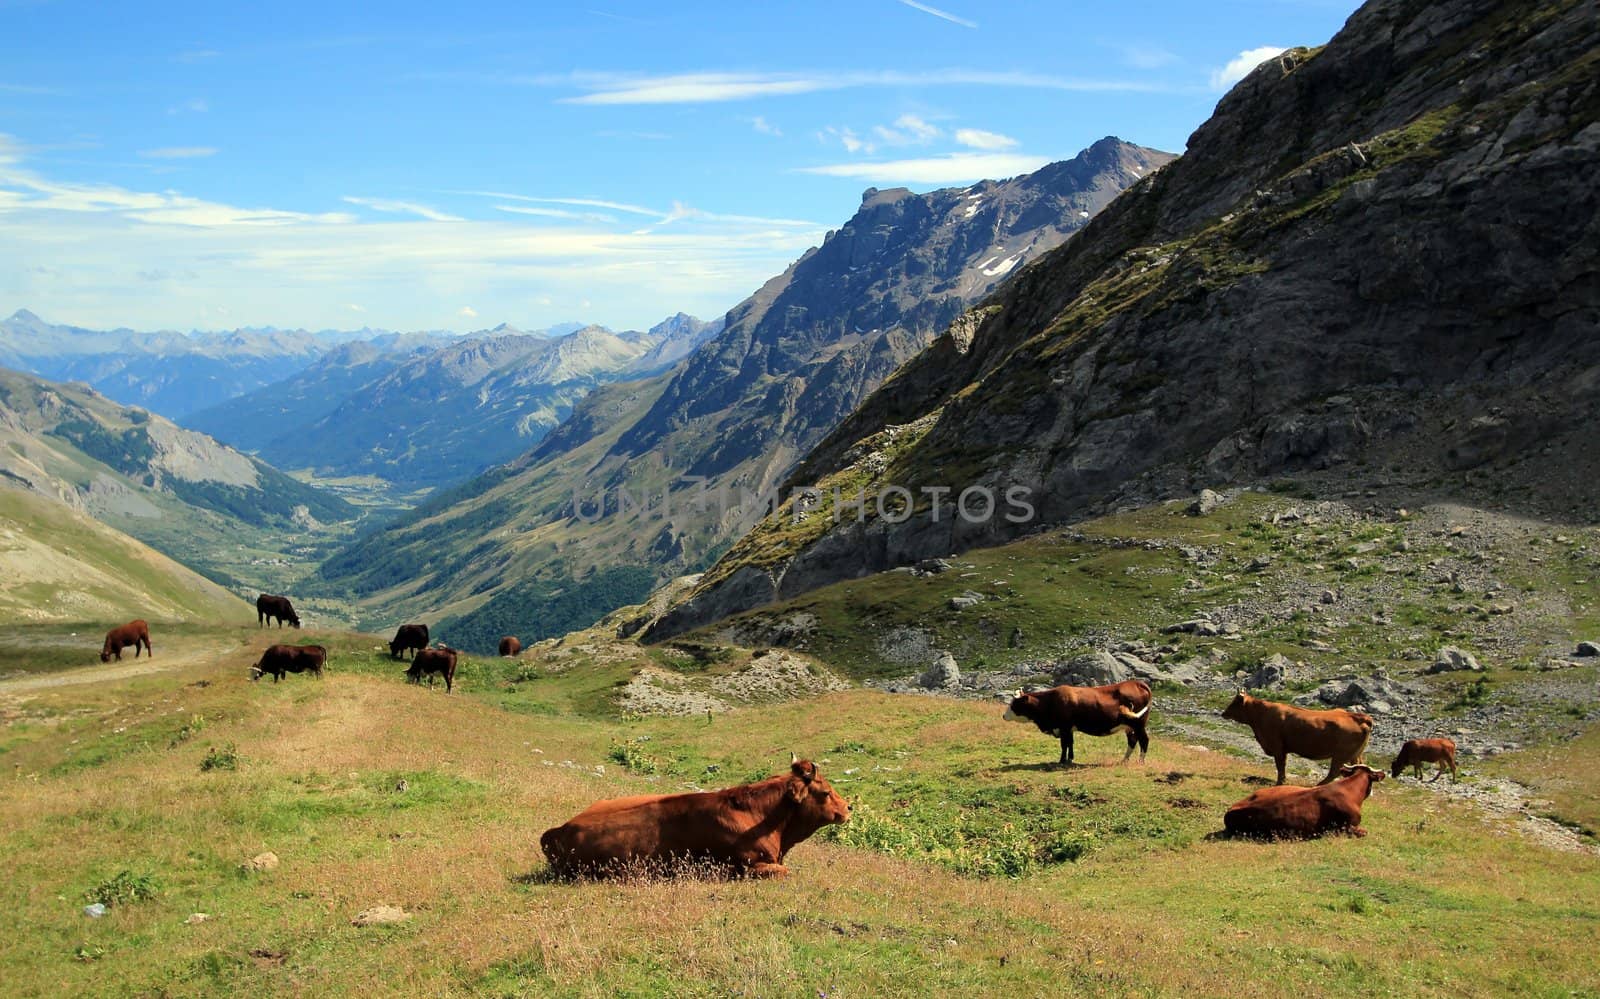 Cows at the Galibier pass, France by Elenaphotos21